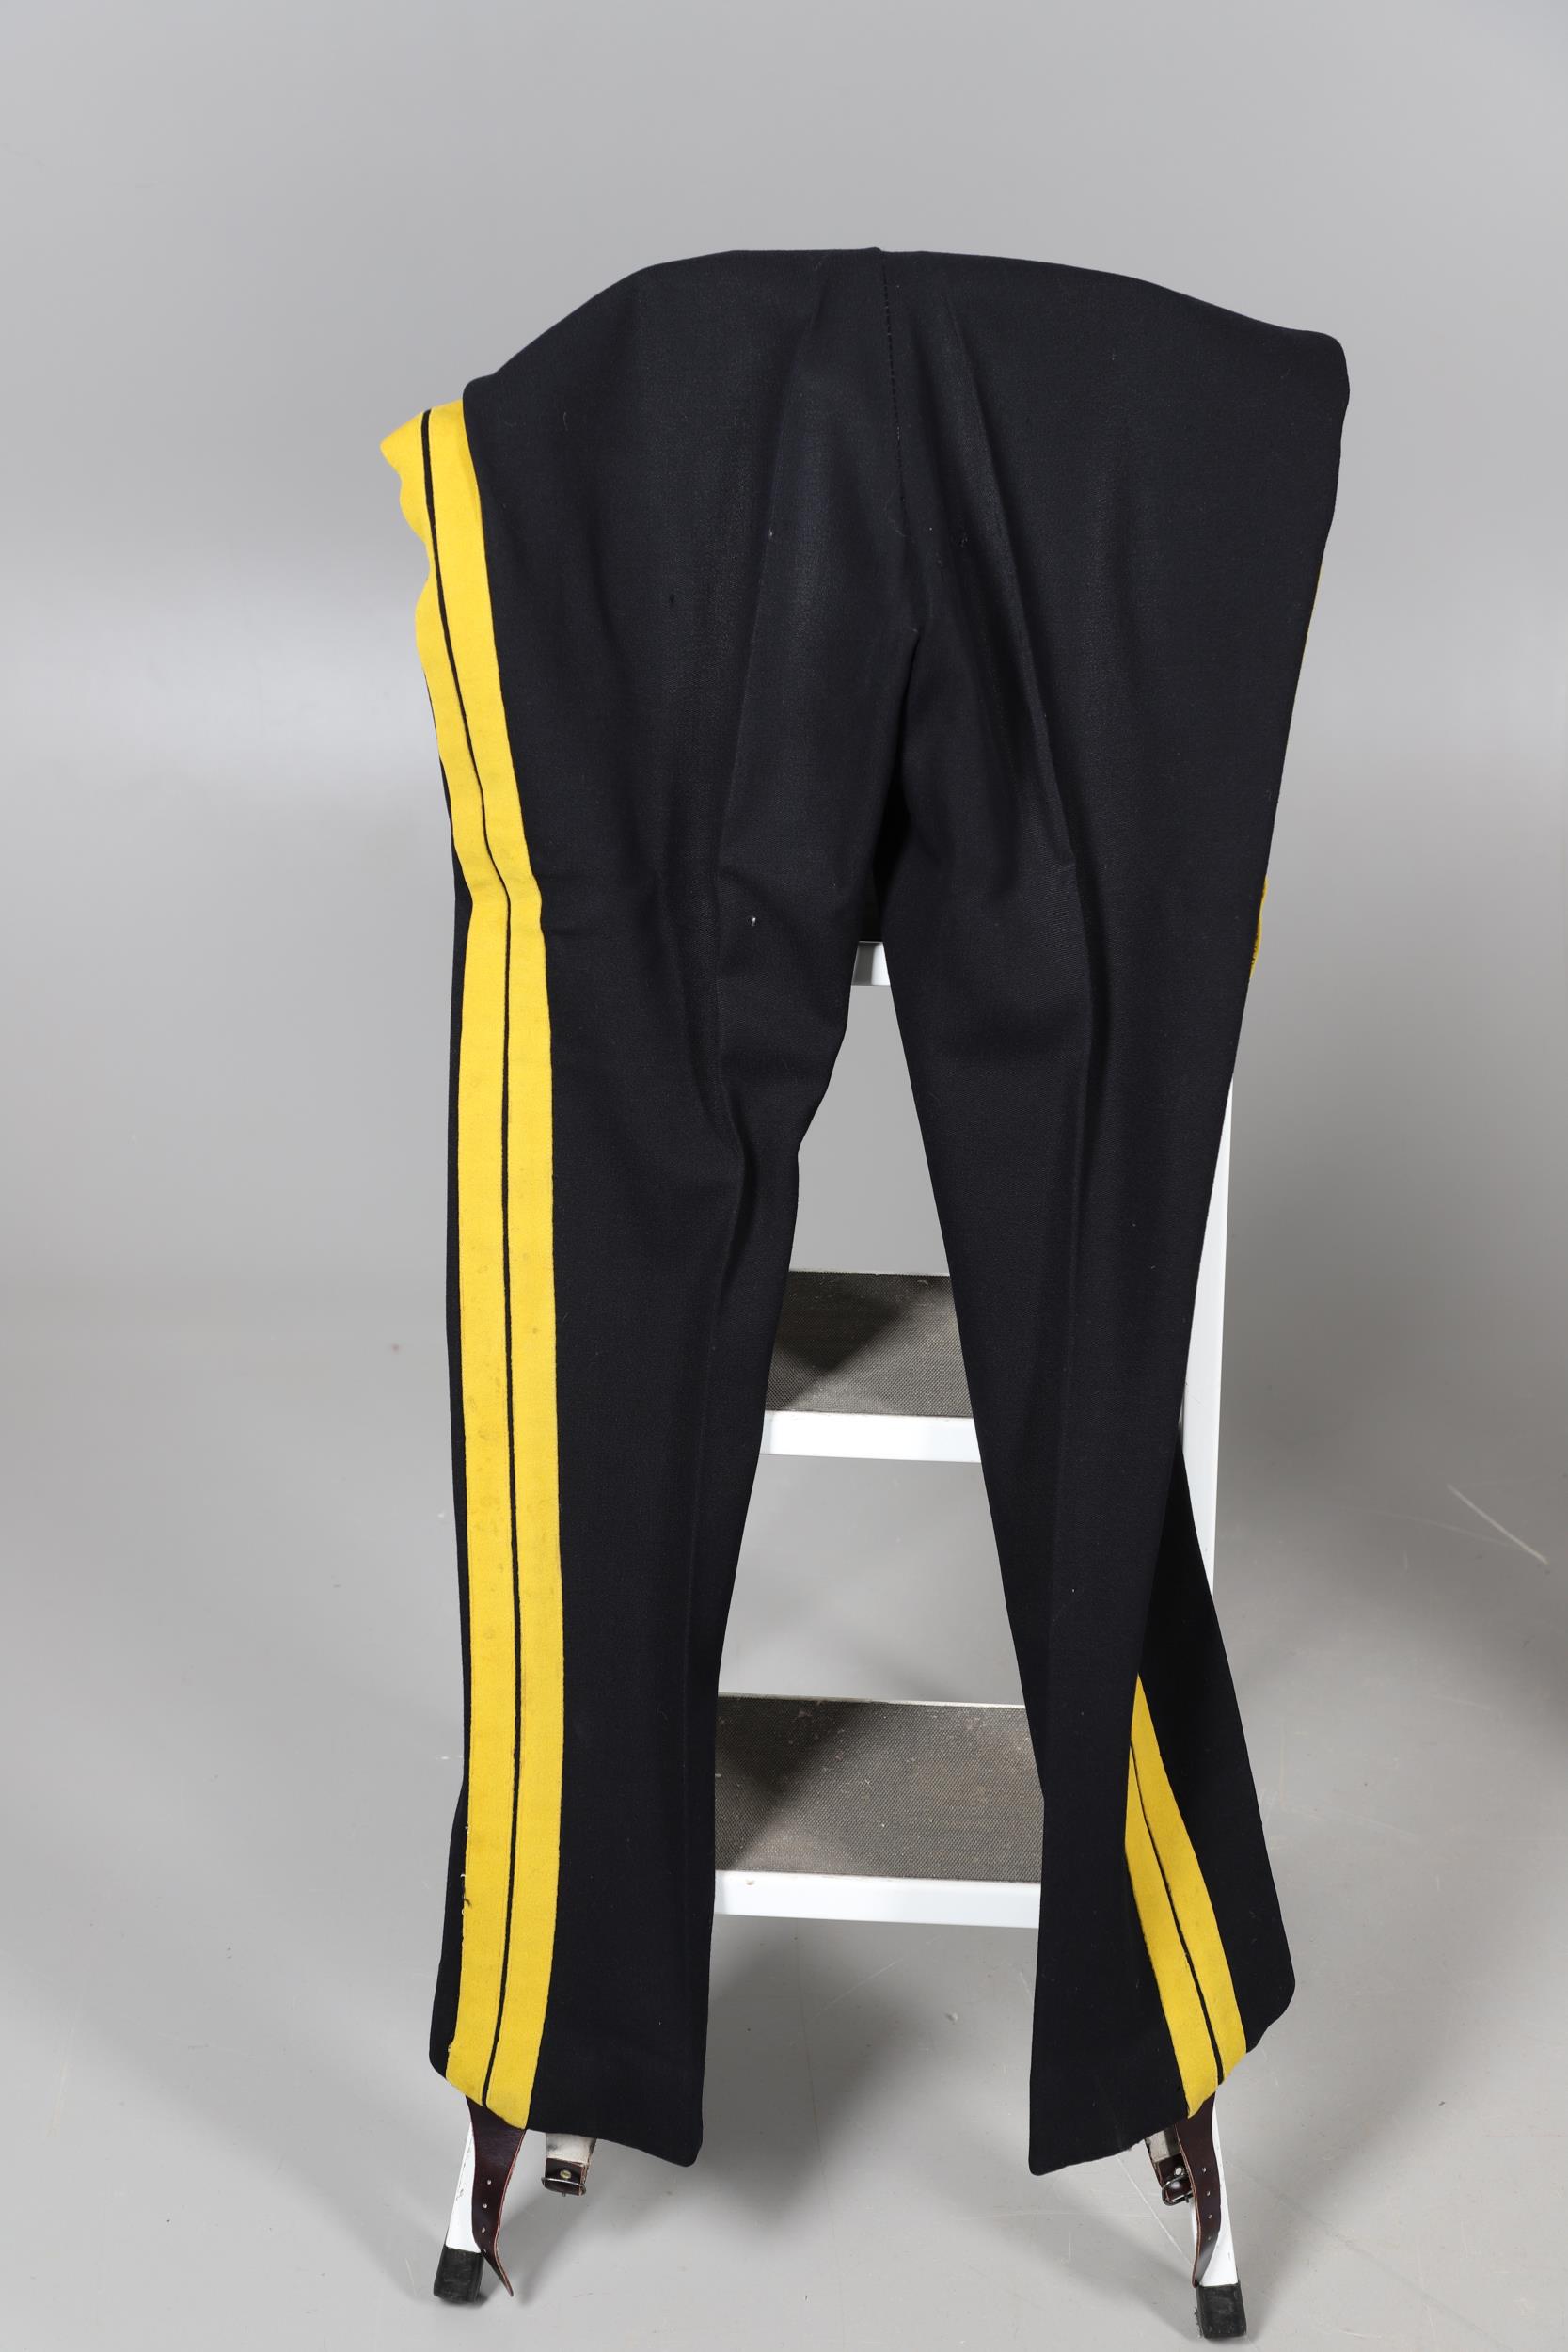 A POST SECOND WORLD WAR MESS JACKET AND BLUES UNIFORM FOR THE 15/19TH HUSSARS. - Image 34 of 34